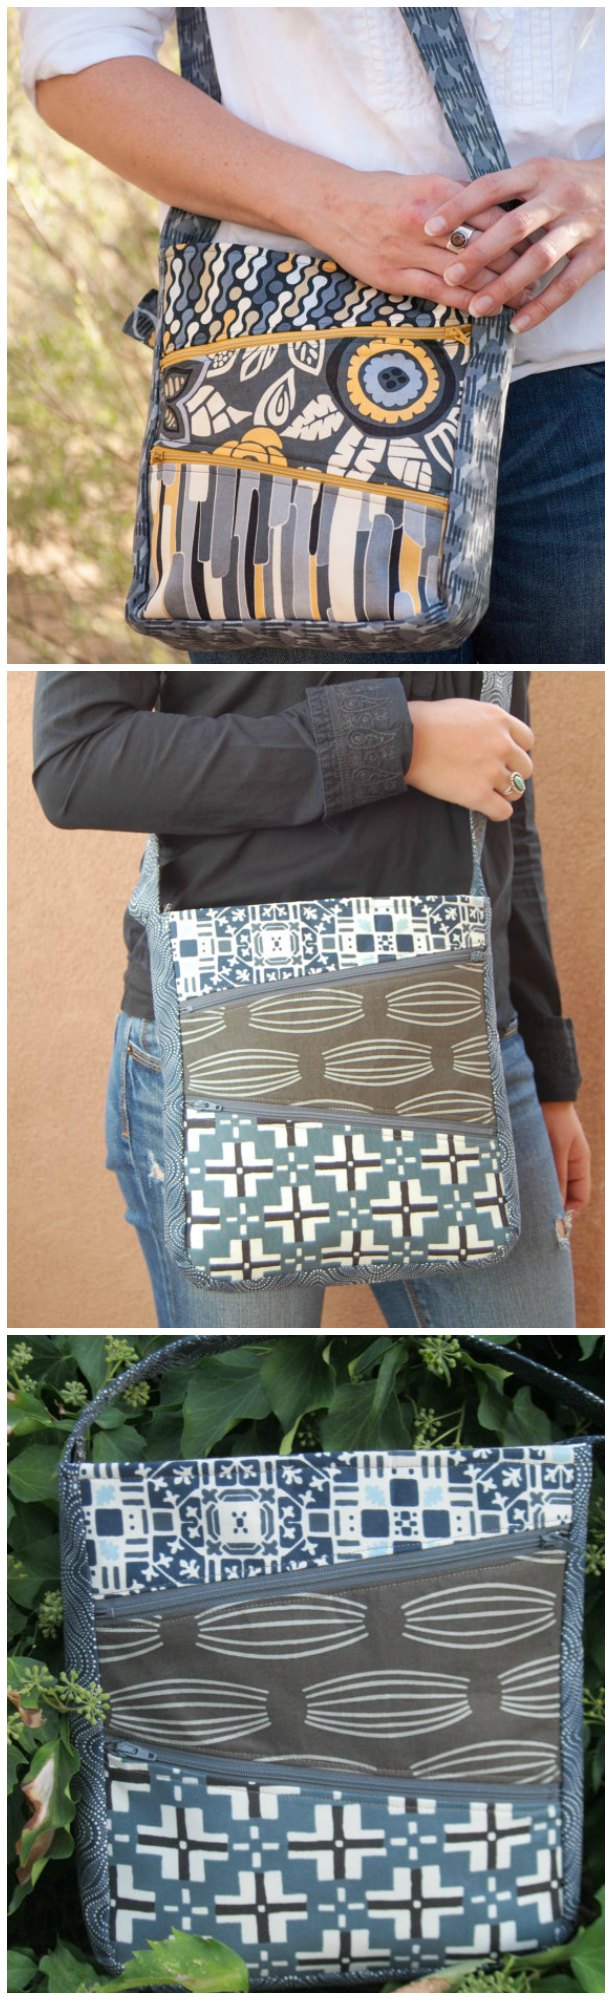 Great bag sewing pattern.  Sometimes you just can't have too many pockets when you need to stay organised.  One of my favorite daytime bags to sew.